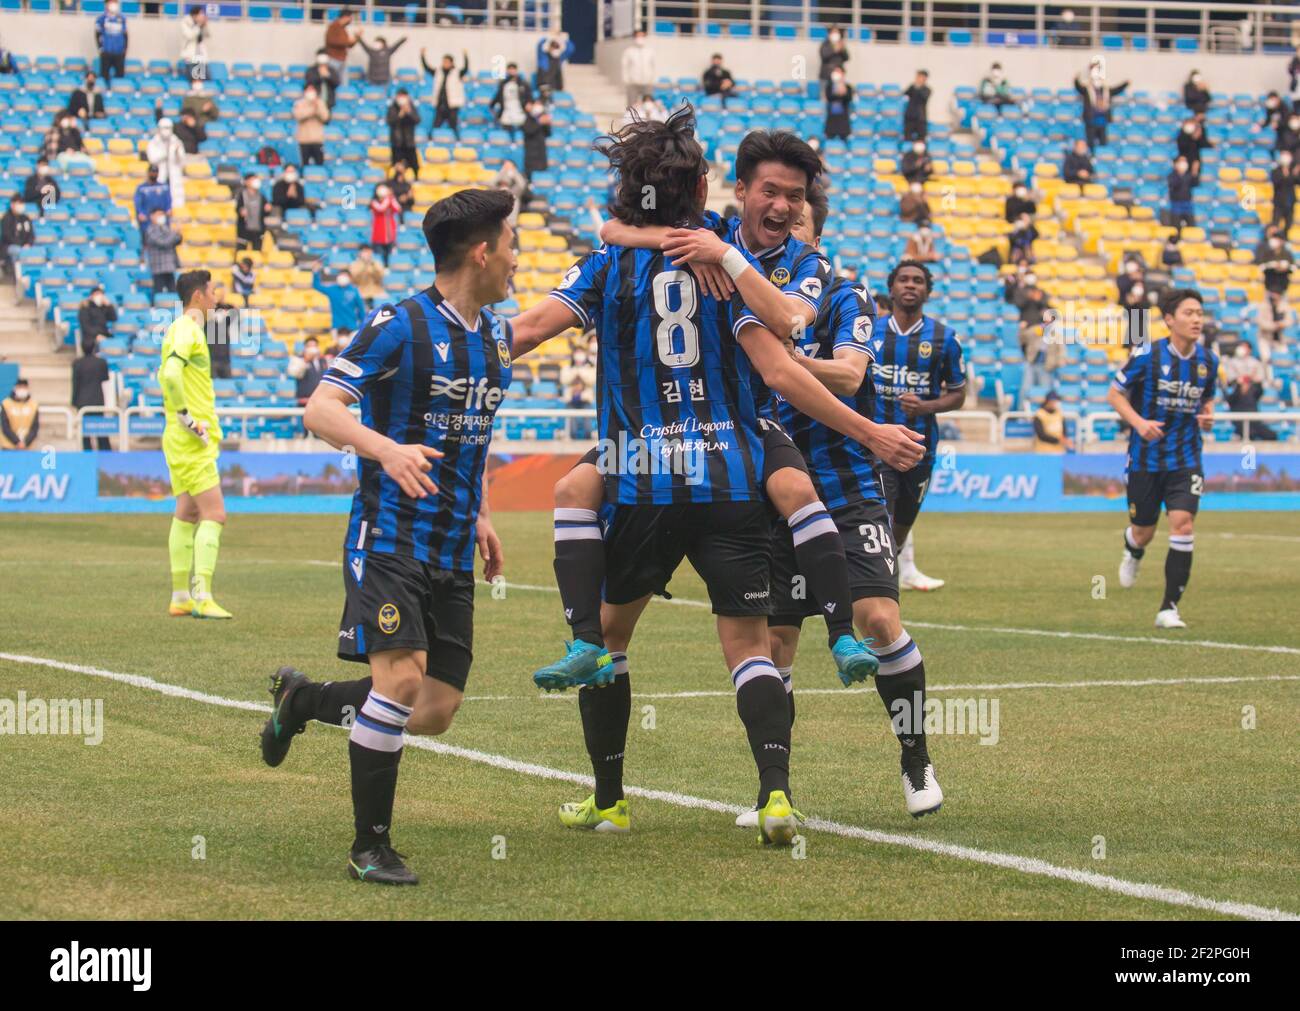 Incheon, South Korea. 06th Mar, 2021. Goo Boon-Cheul (3rd L) of Incheon United FC celebrates his goal with his teammates Kim Hyun (2nd L) and Kim Do-Hyeok (L) during the 2nd round of the 2021 K League 1 soccer match between Incheon United FC and Daegu FC at the Incheon Football Stadium.(Final score; Incheon United FC 2:1 Daegu FC) (Photo by Jaewon Lee/SOPA Images/Sipa USA) Credit: Sipa USA/Alamy Live News Stock Photo